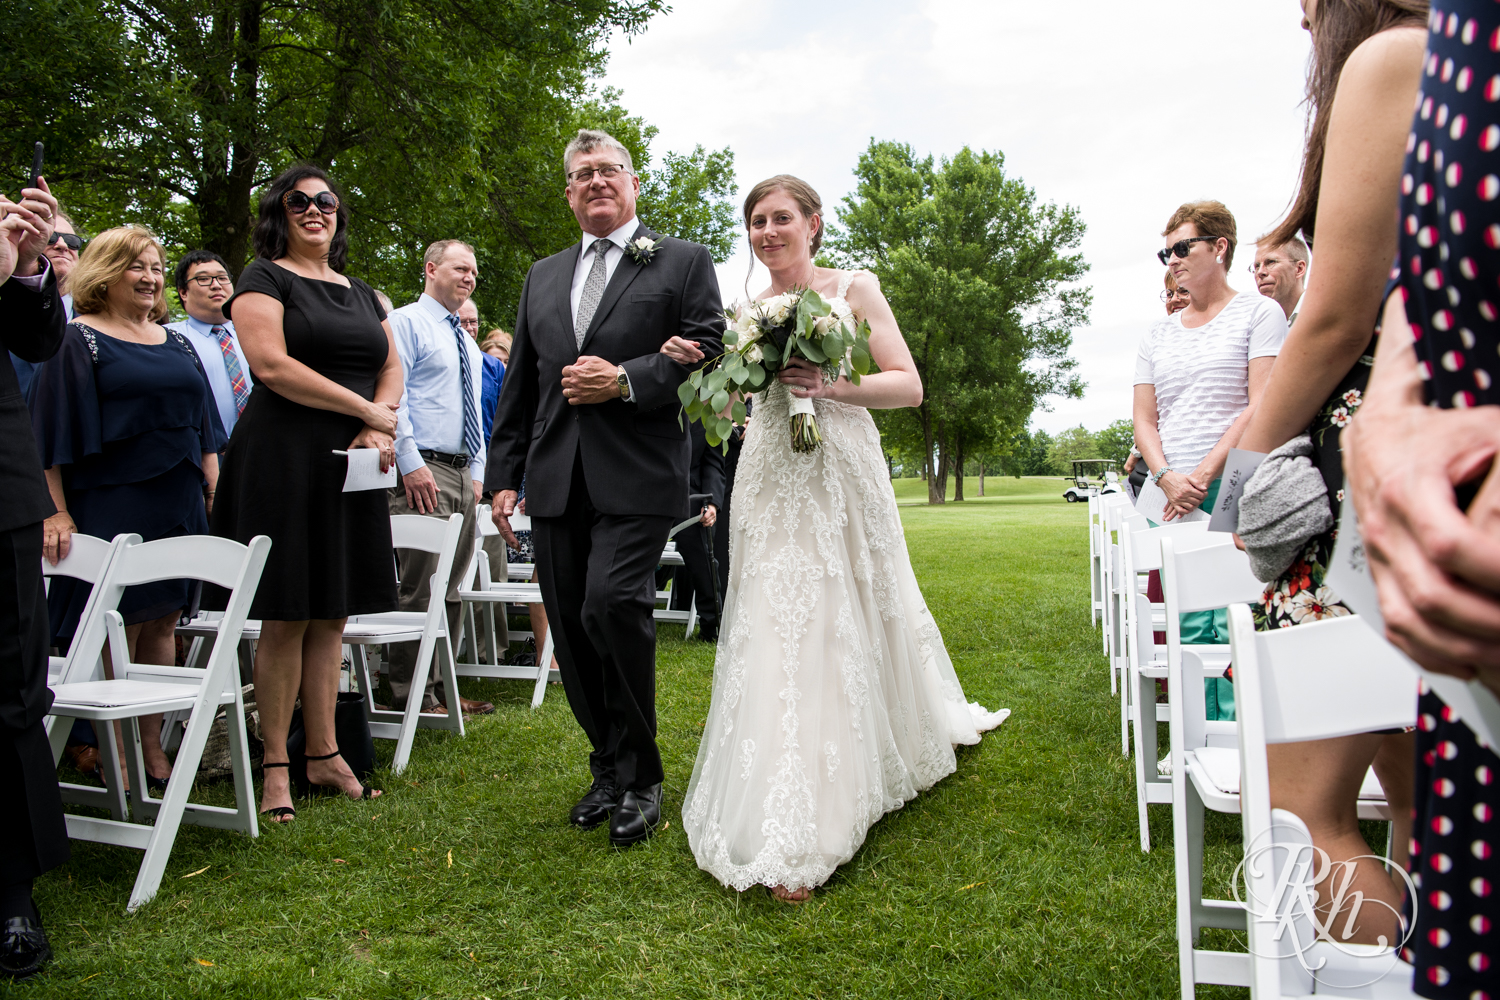 Bride walks down the aisle with dad at ceremony at Oak Glen Golf Course in Stillwater, Minnesota.